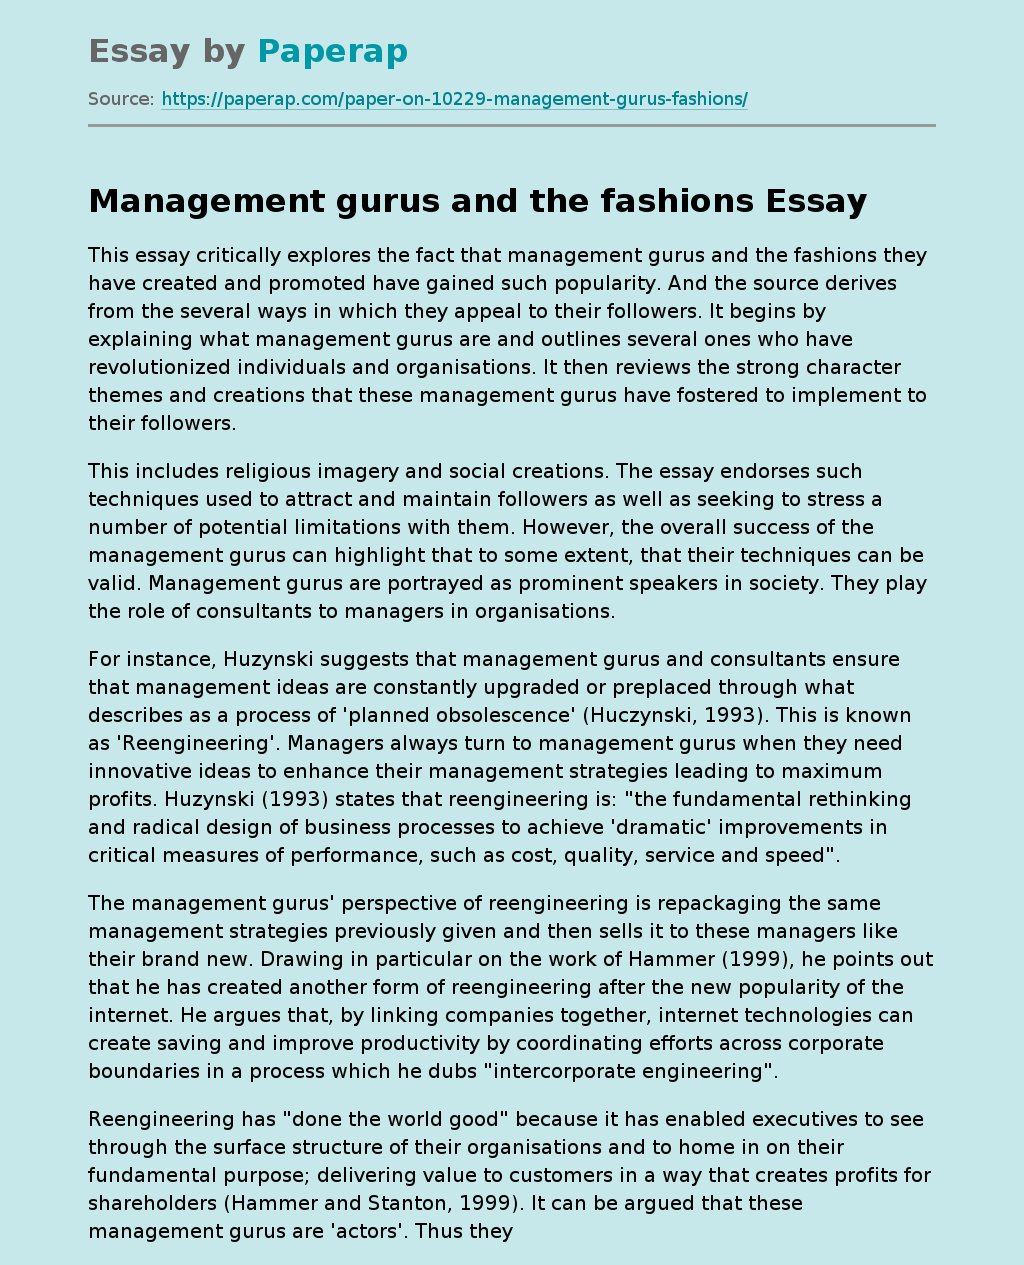 Management Gurus and the Fashions